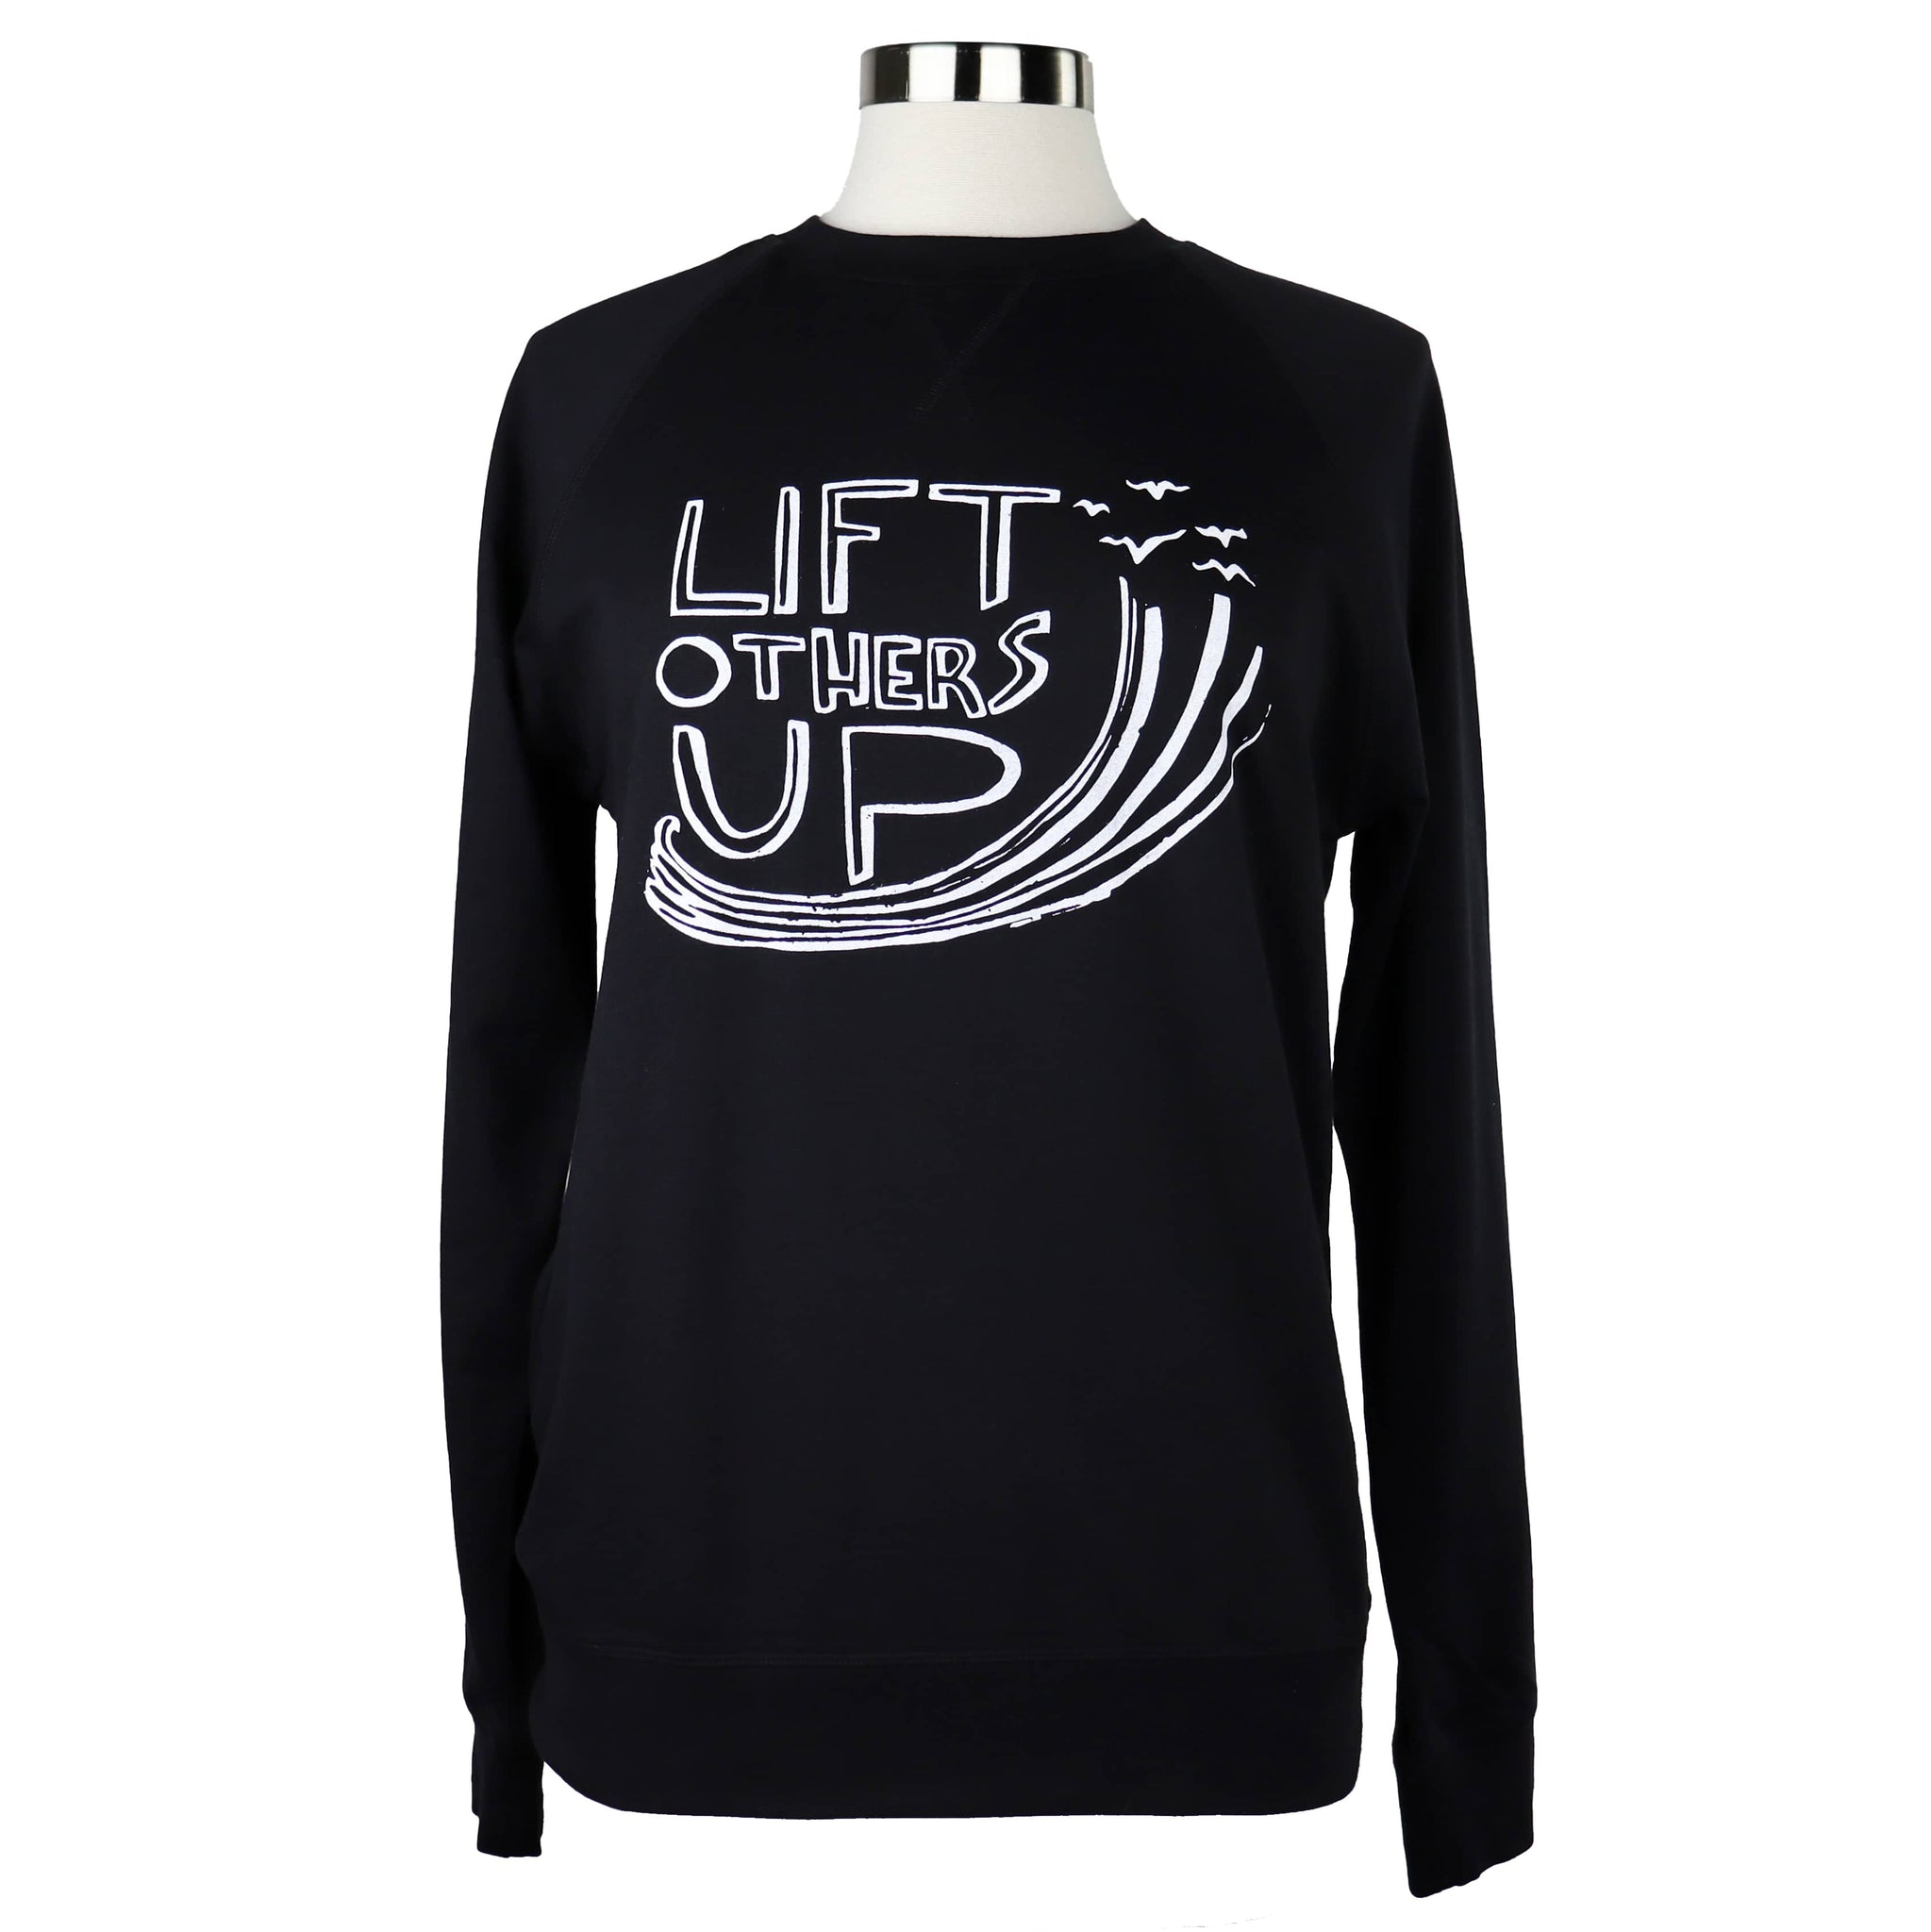 Lift Others Up Unisex French Terry Crewneck in Black